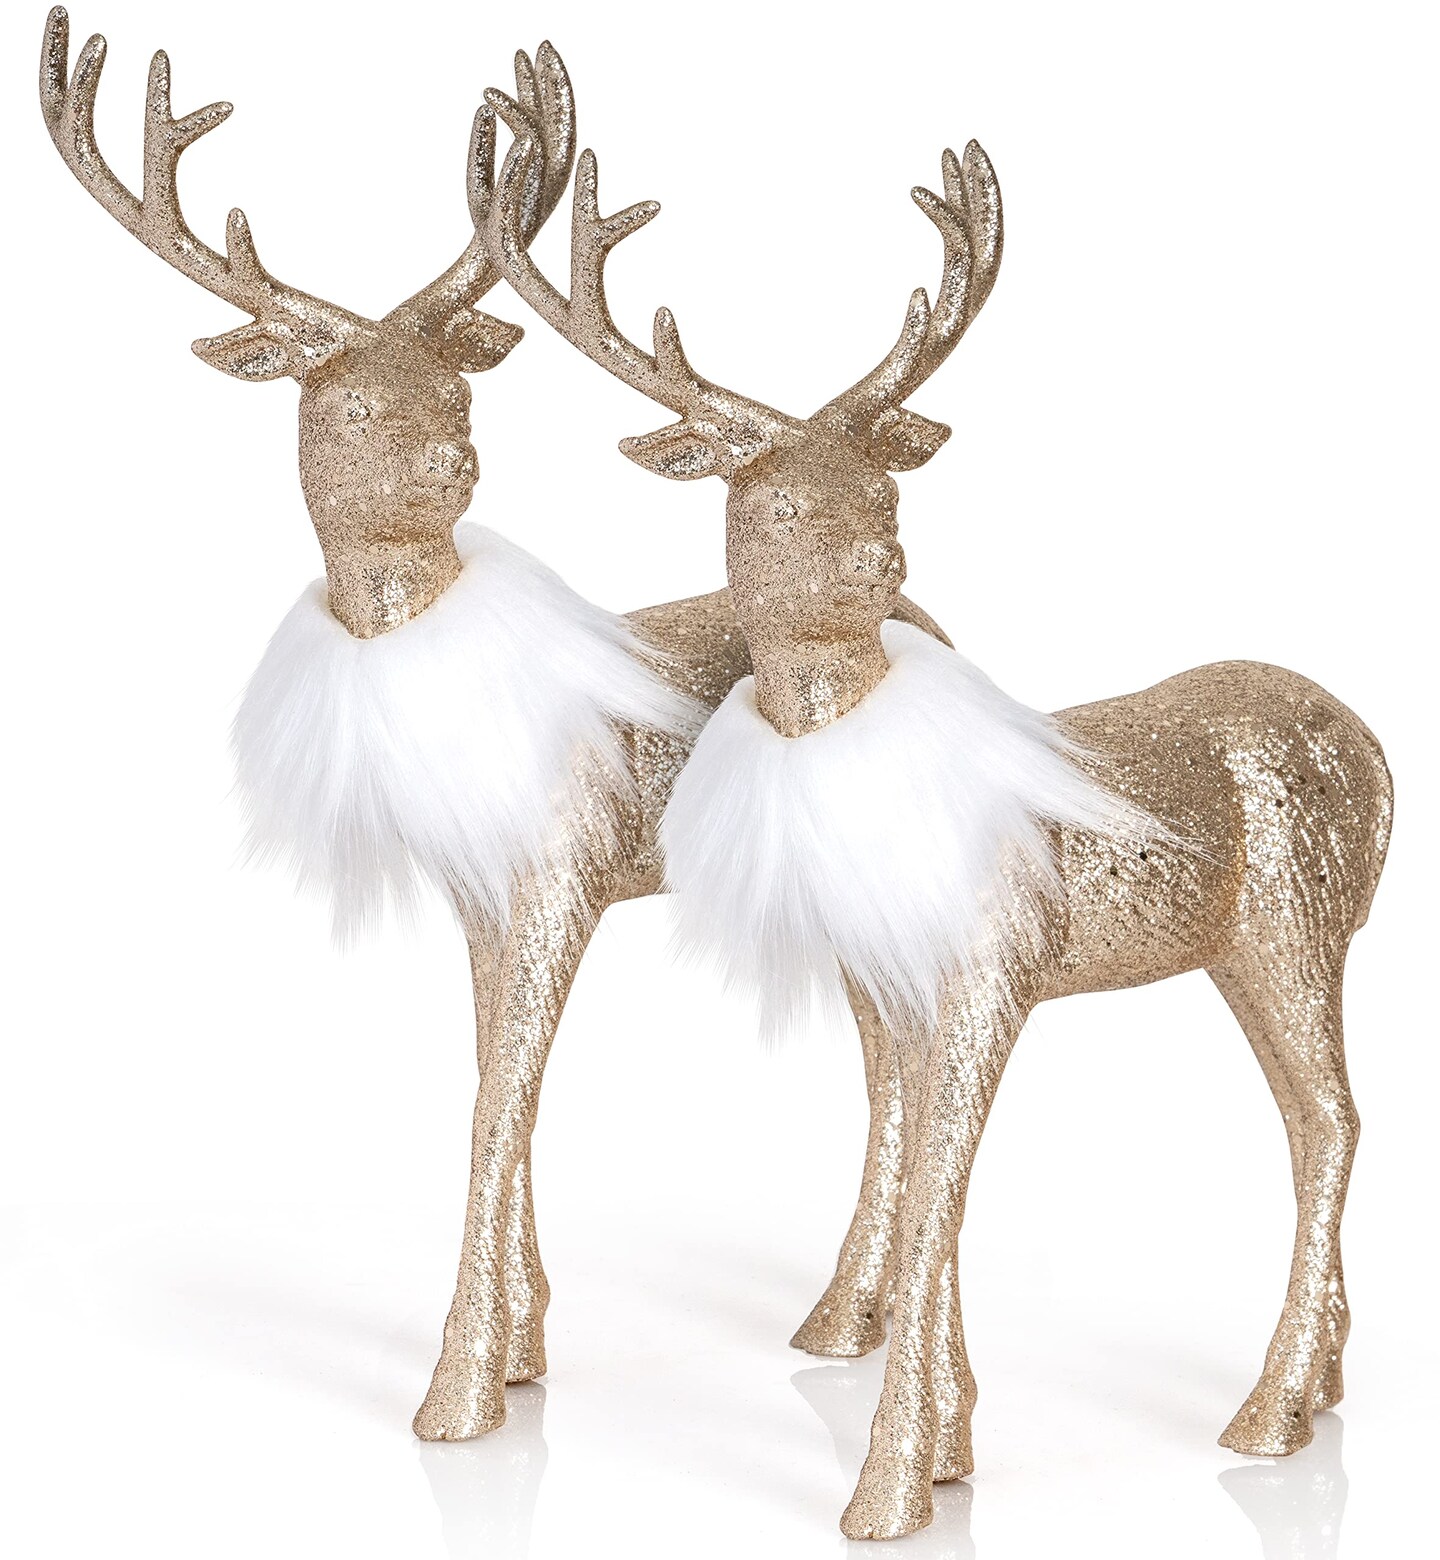 Ornativity Gold Glitter Christmas Reindeer - Holiday Party Deer Figurine Statues Dinner Tabletop Decorations Centerpiece - Pack of 2